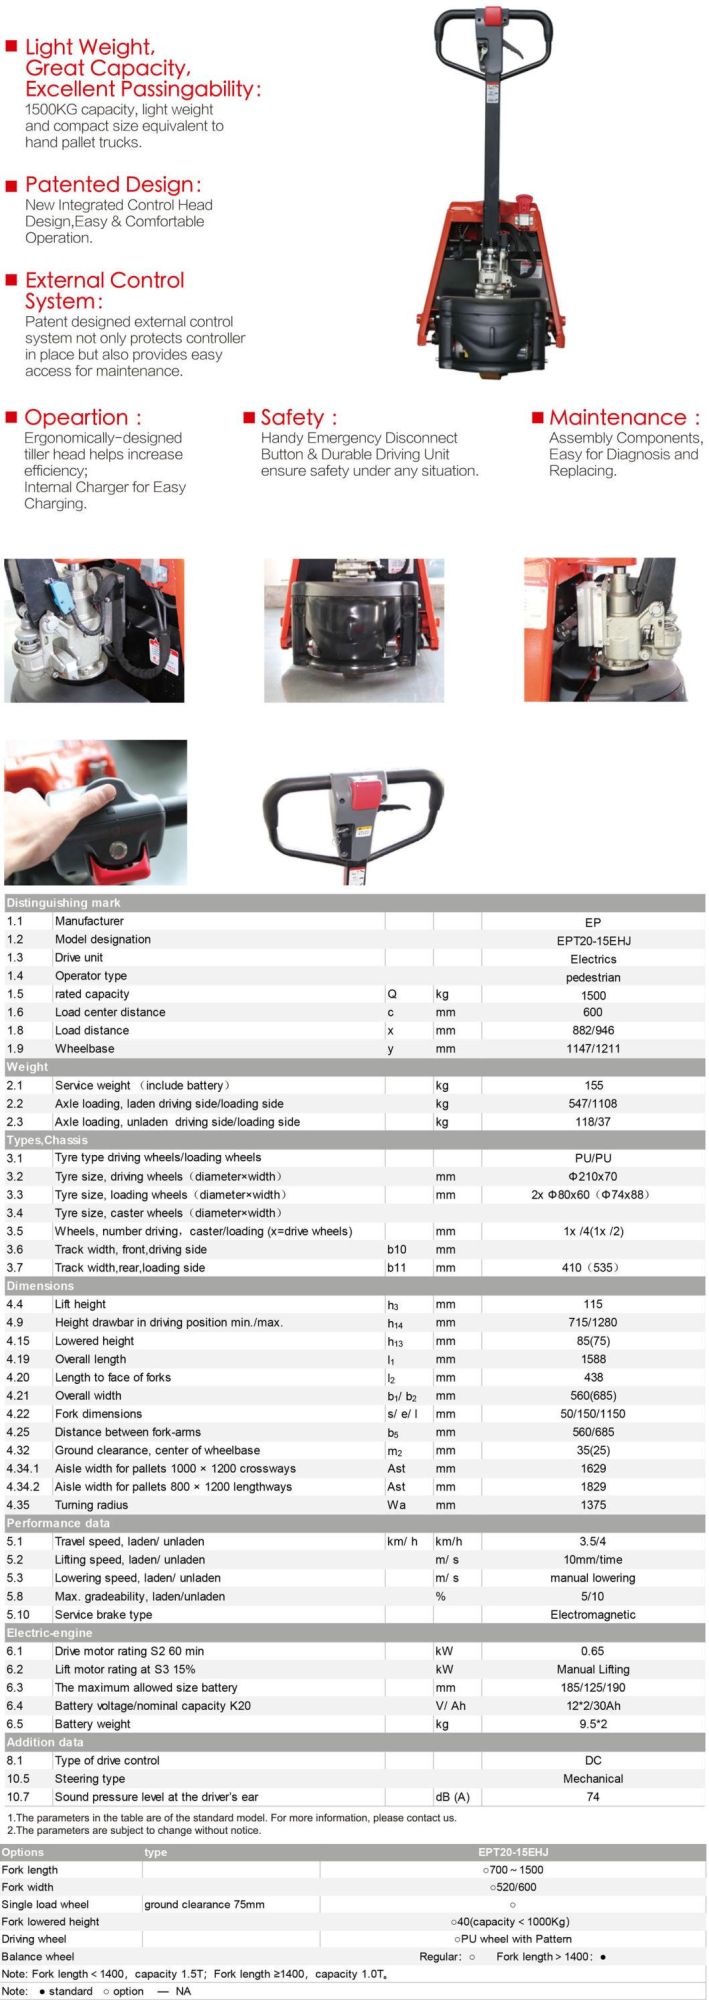 1.5t Economic Semi-Electric Hand Pallet Truck Ept20-15ehj